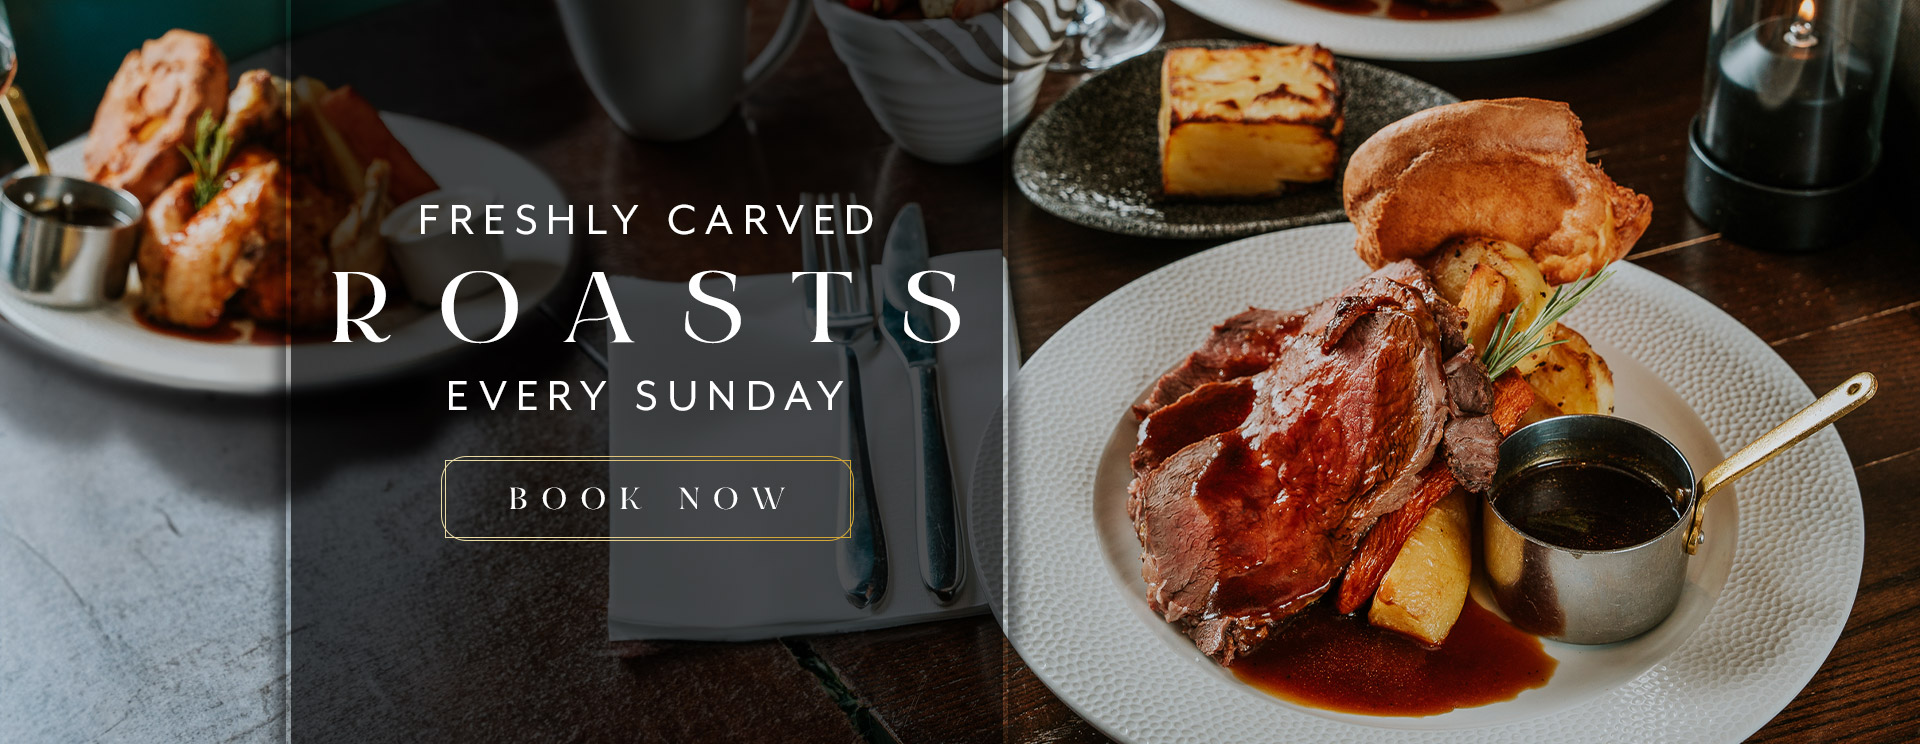 Sunday Lunch at One Kew Road